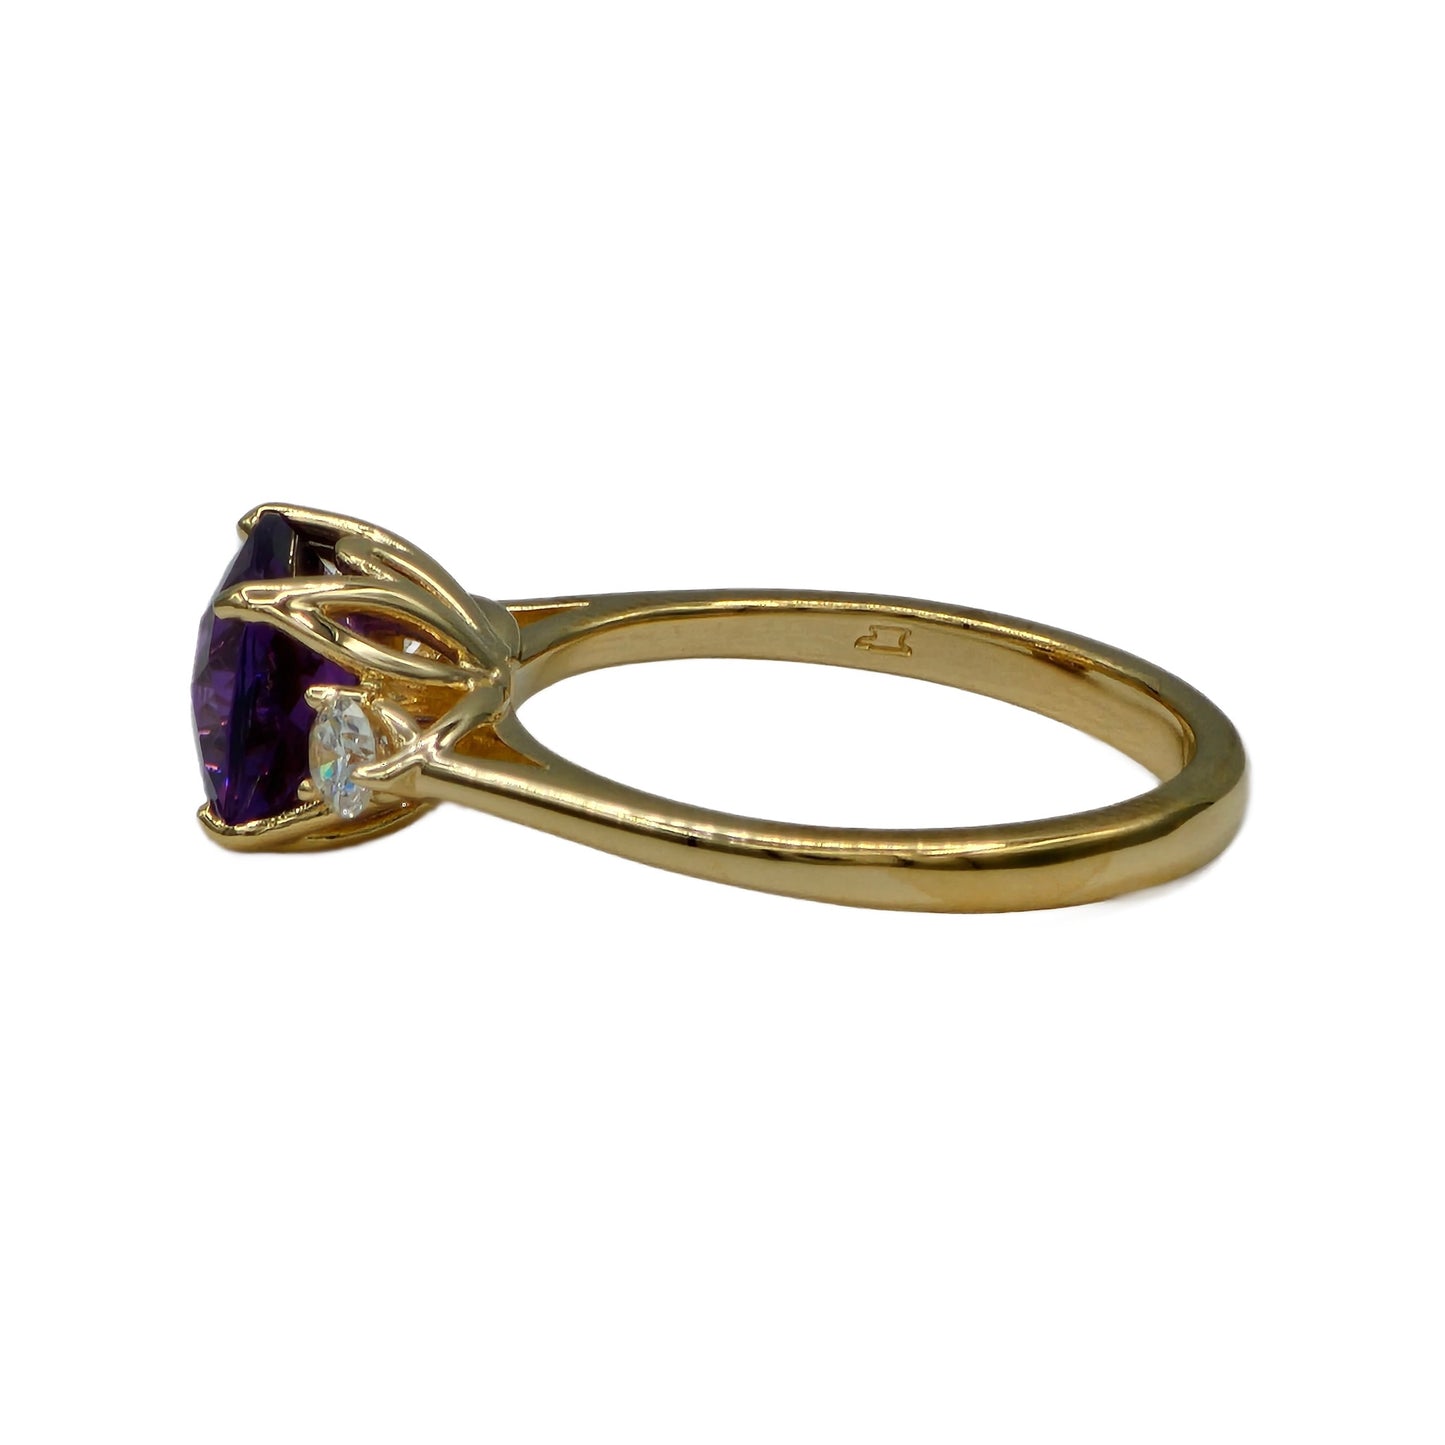 8MM Cushion Cut Amethyst and Diamond Ring in 14K Yellow Gold